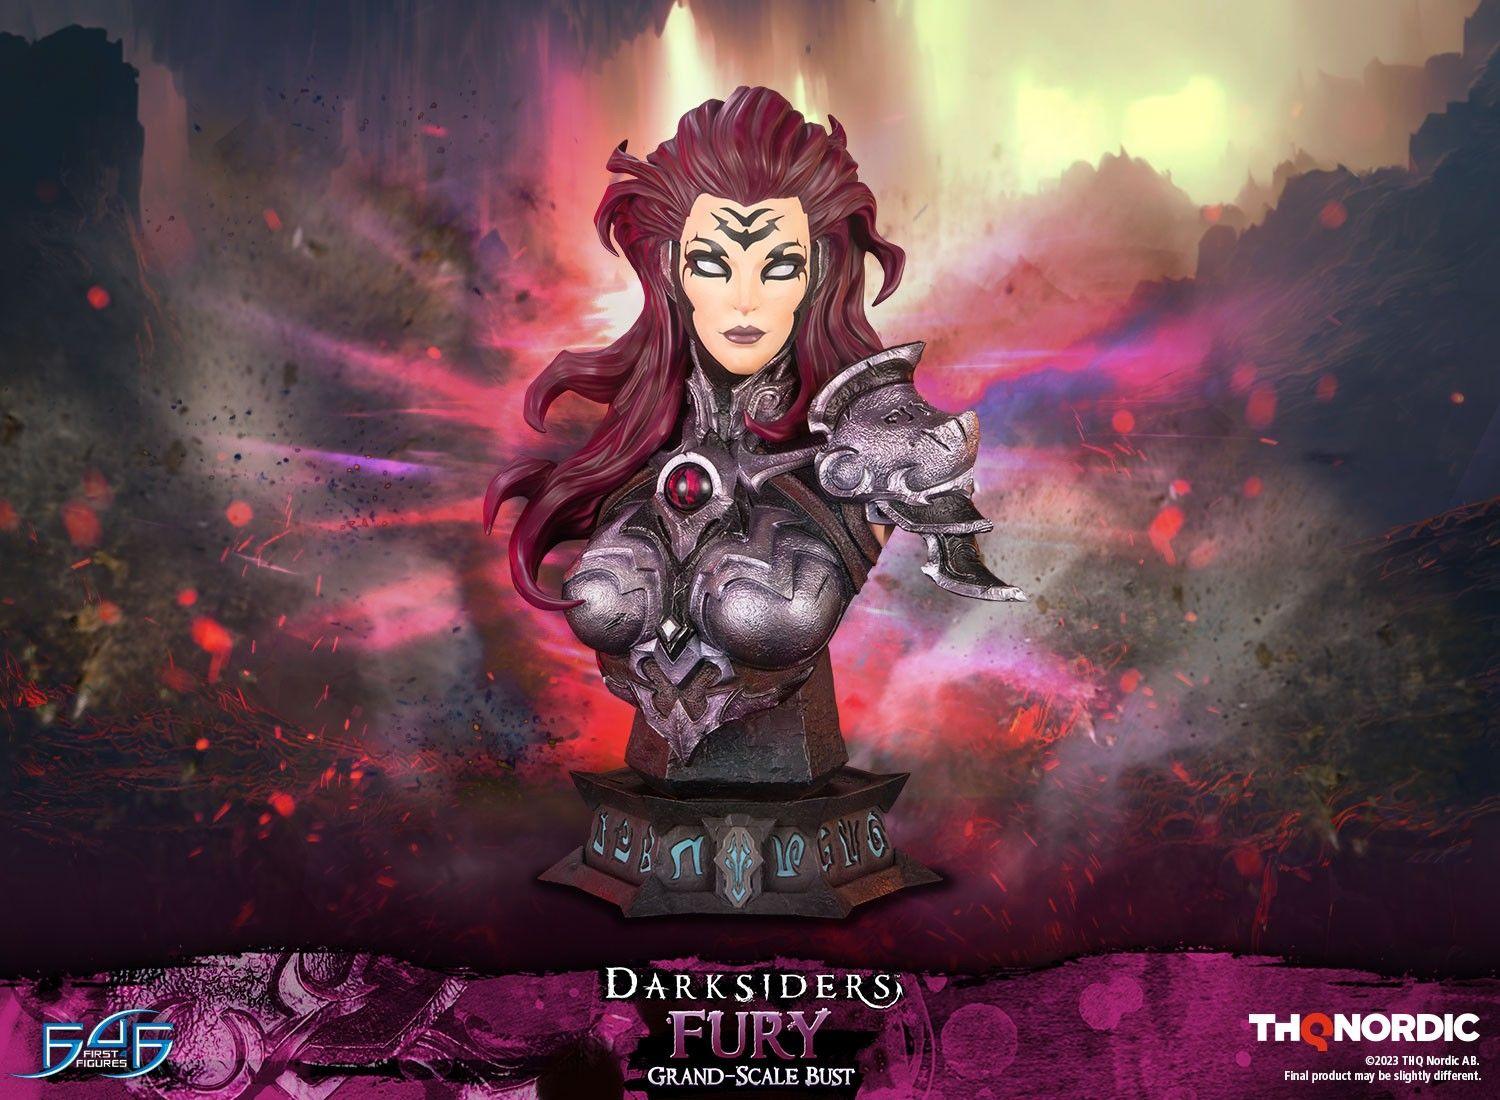 Darksiders - Fury Grand Scale Bust Bust by First 4 Figures | Titan Pop Culture